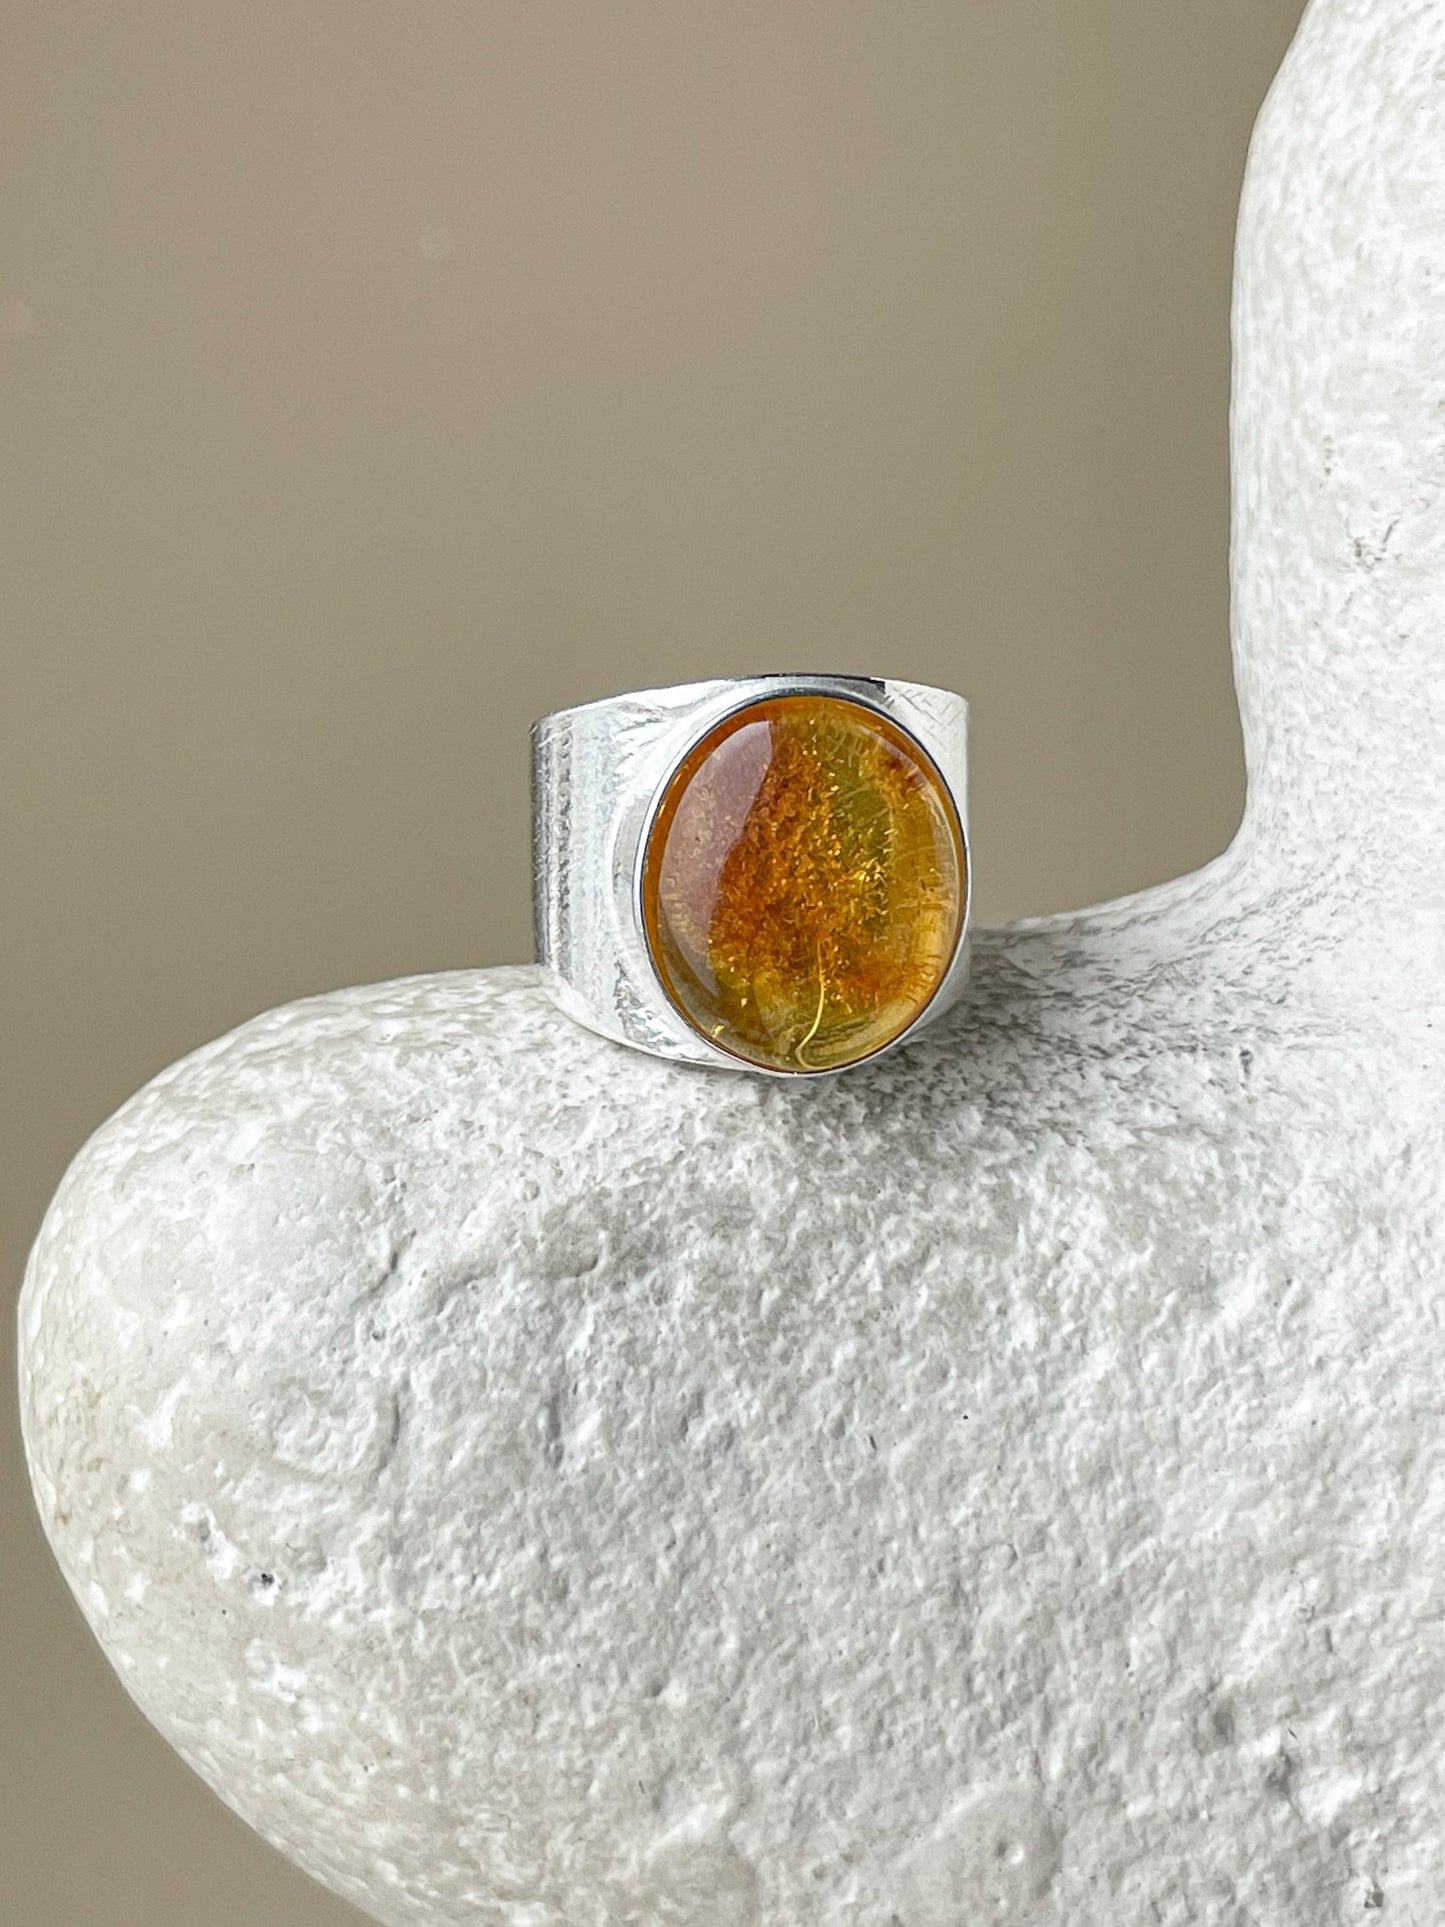 Honey amber ring - Sterling silver - Statement ring collection - Size 6 1/2